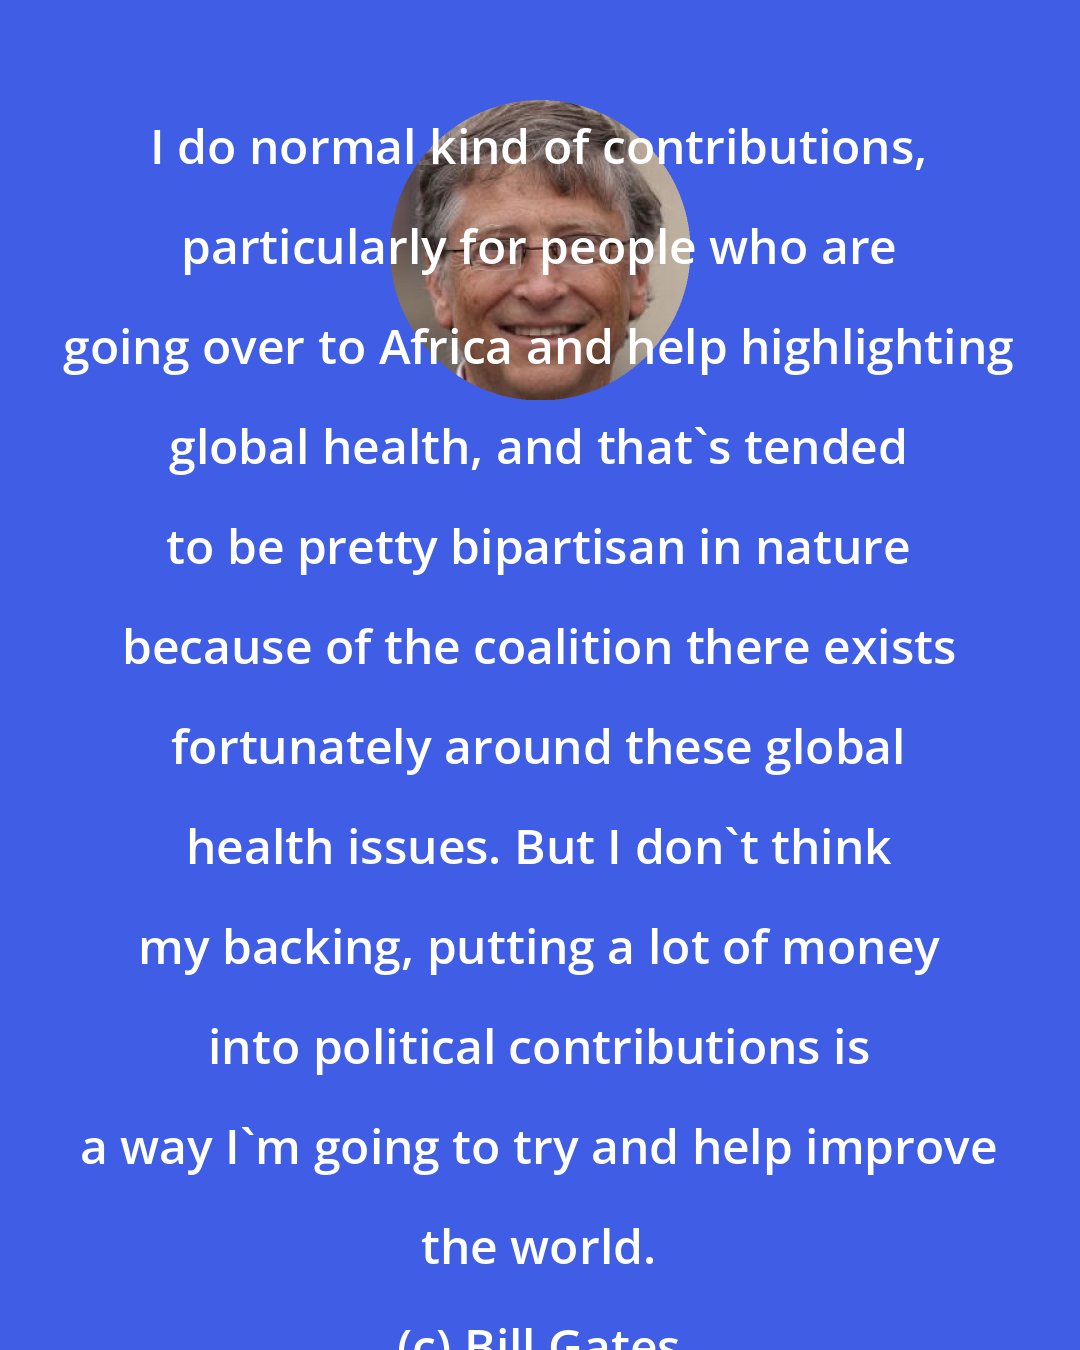 Bill Gates: I do normal kind of contributions, particularly for people who are going over to Africa and help highlighting global health, and that's tended to be pretty bipartisan in nature because of the coalition there exists fortunately around these global health issues. But I don't think my backing, putting a lot of money into political contributions is a way I'm going to try and help improve the world.